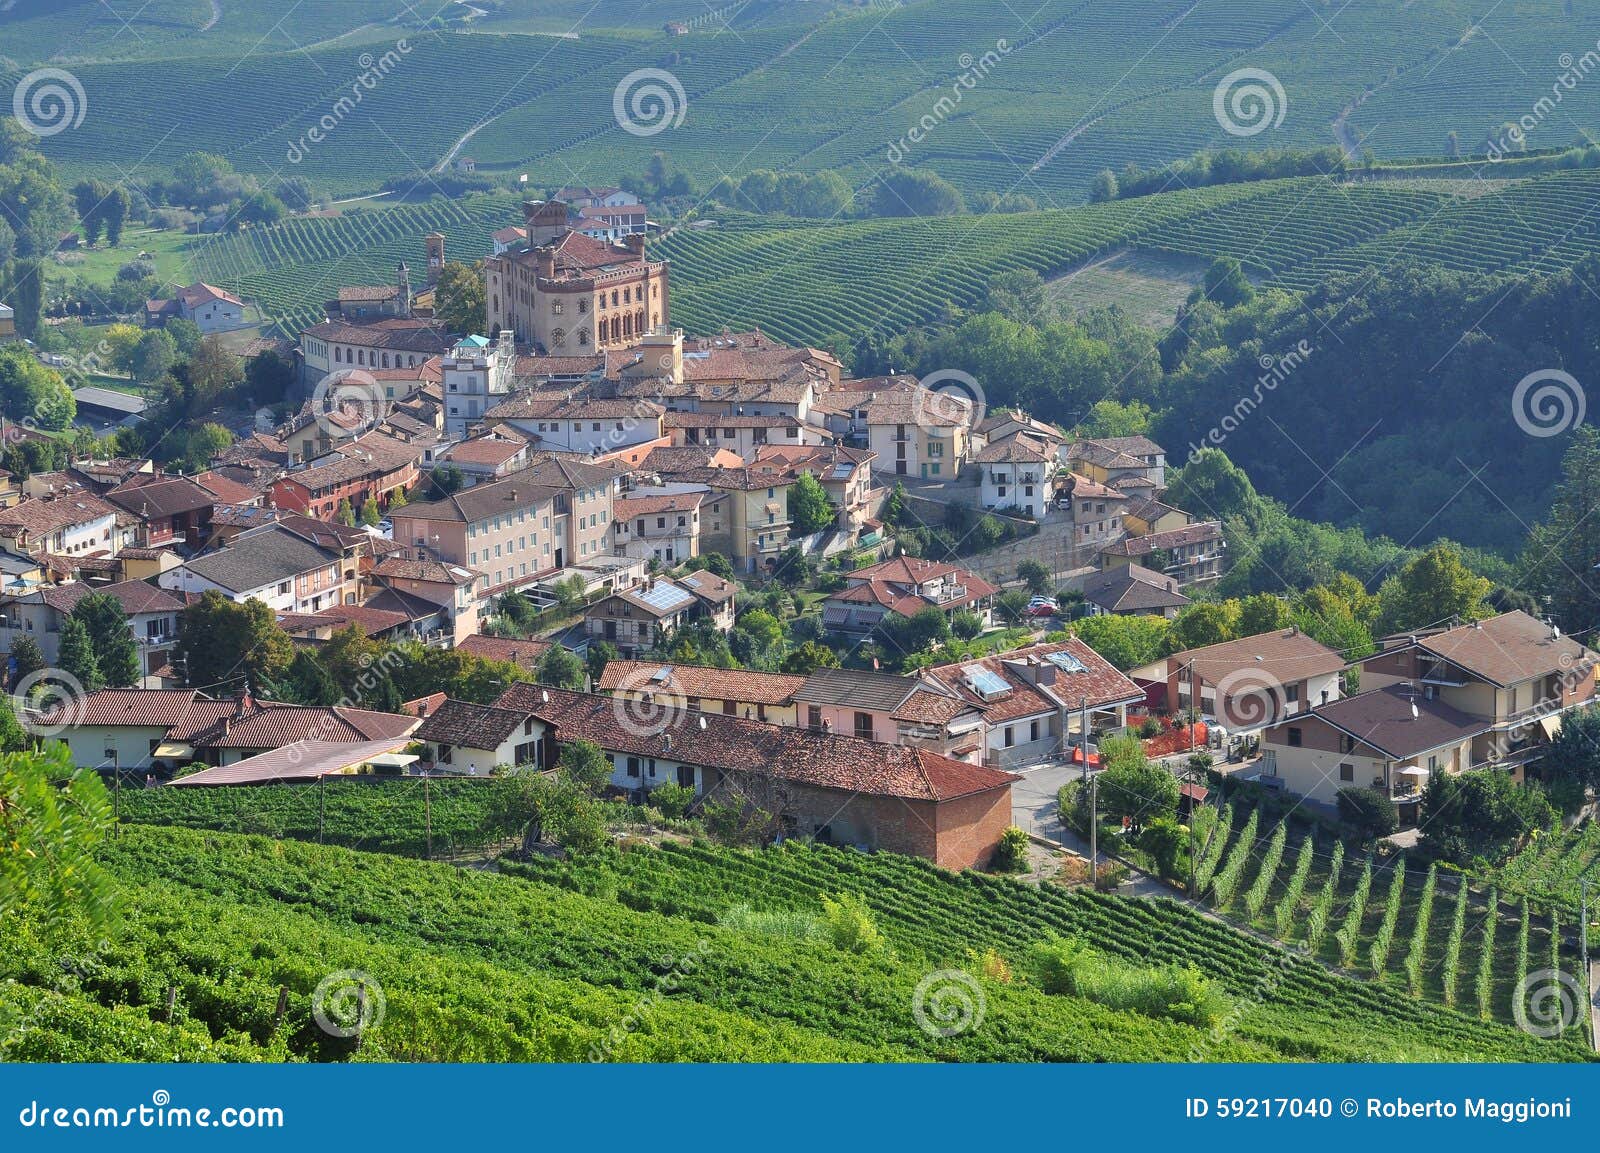 barolo, vineyard and hills of the langhe region. piemonte, italy